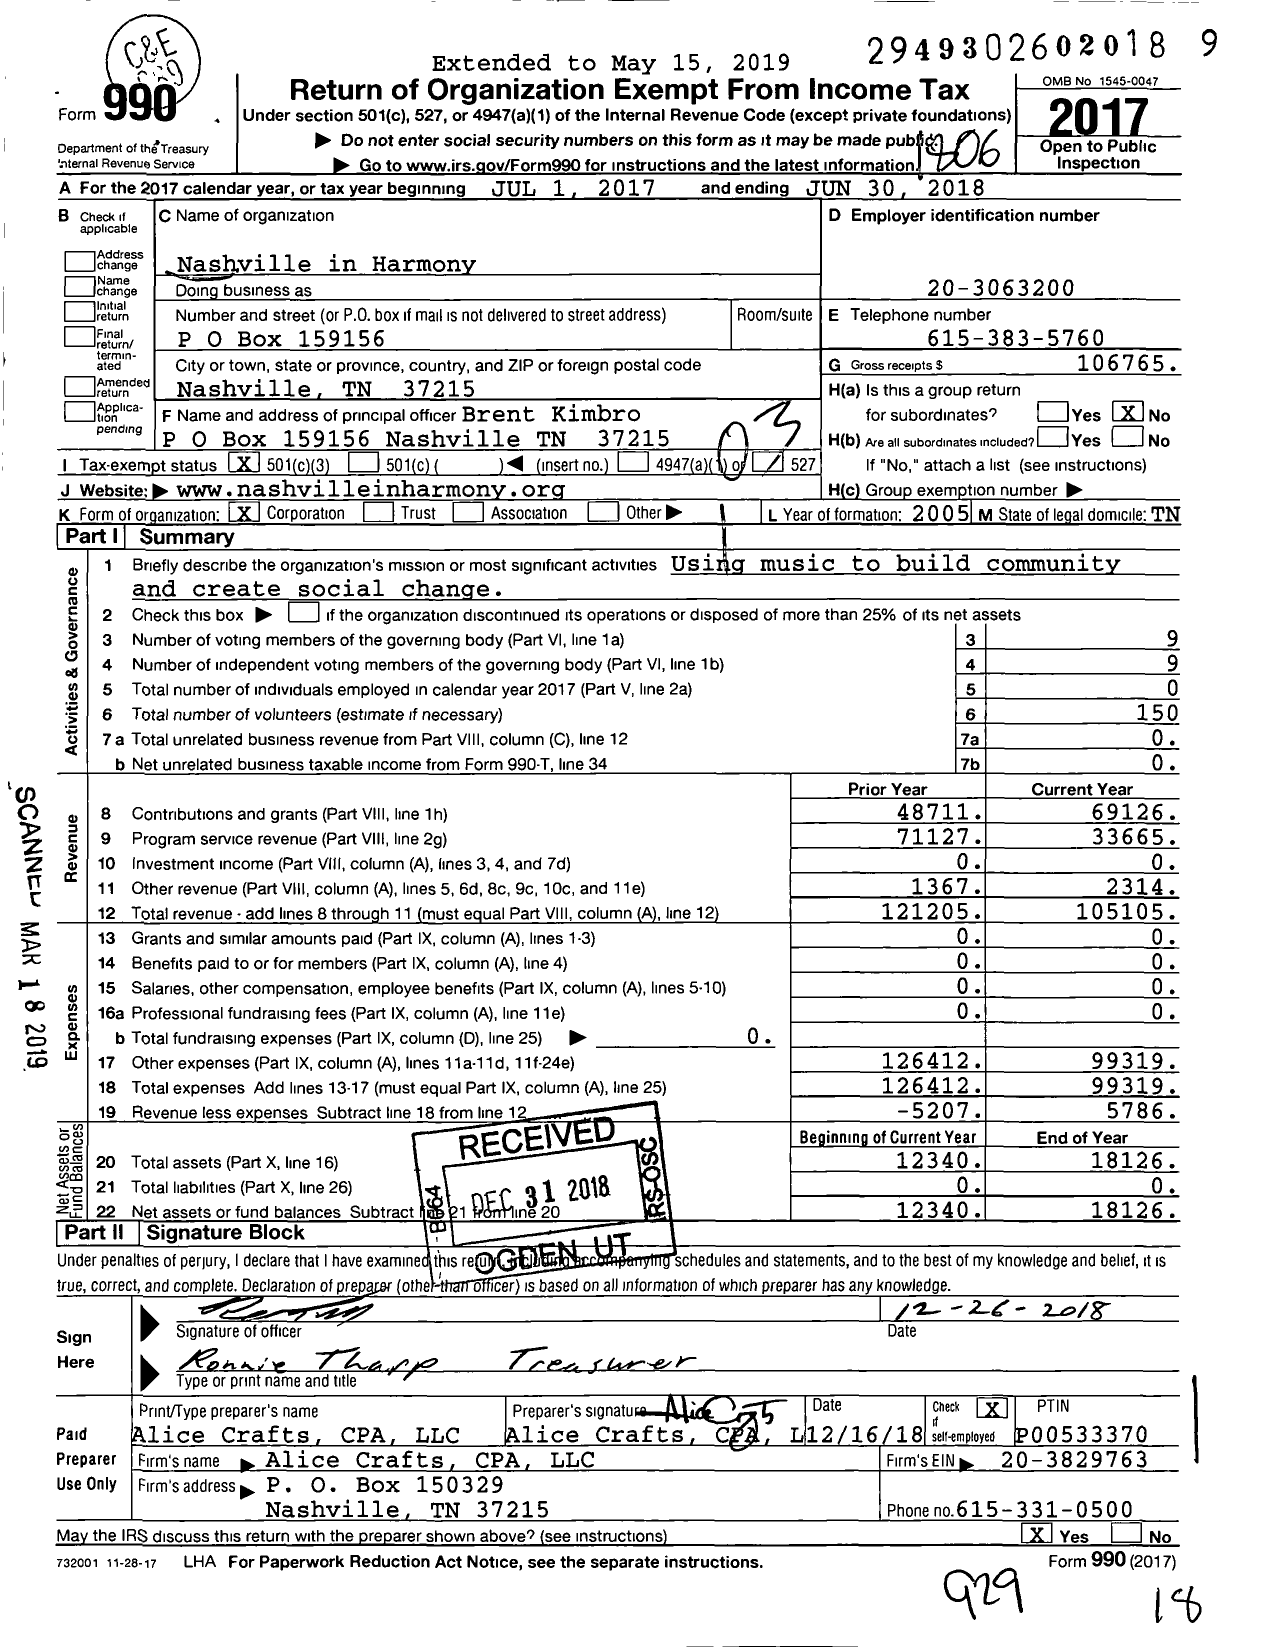 Image of first page of 2017 Form 990 for Nashville in Harmony